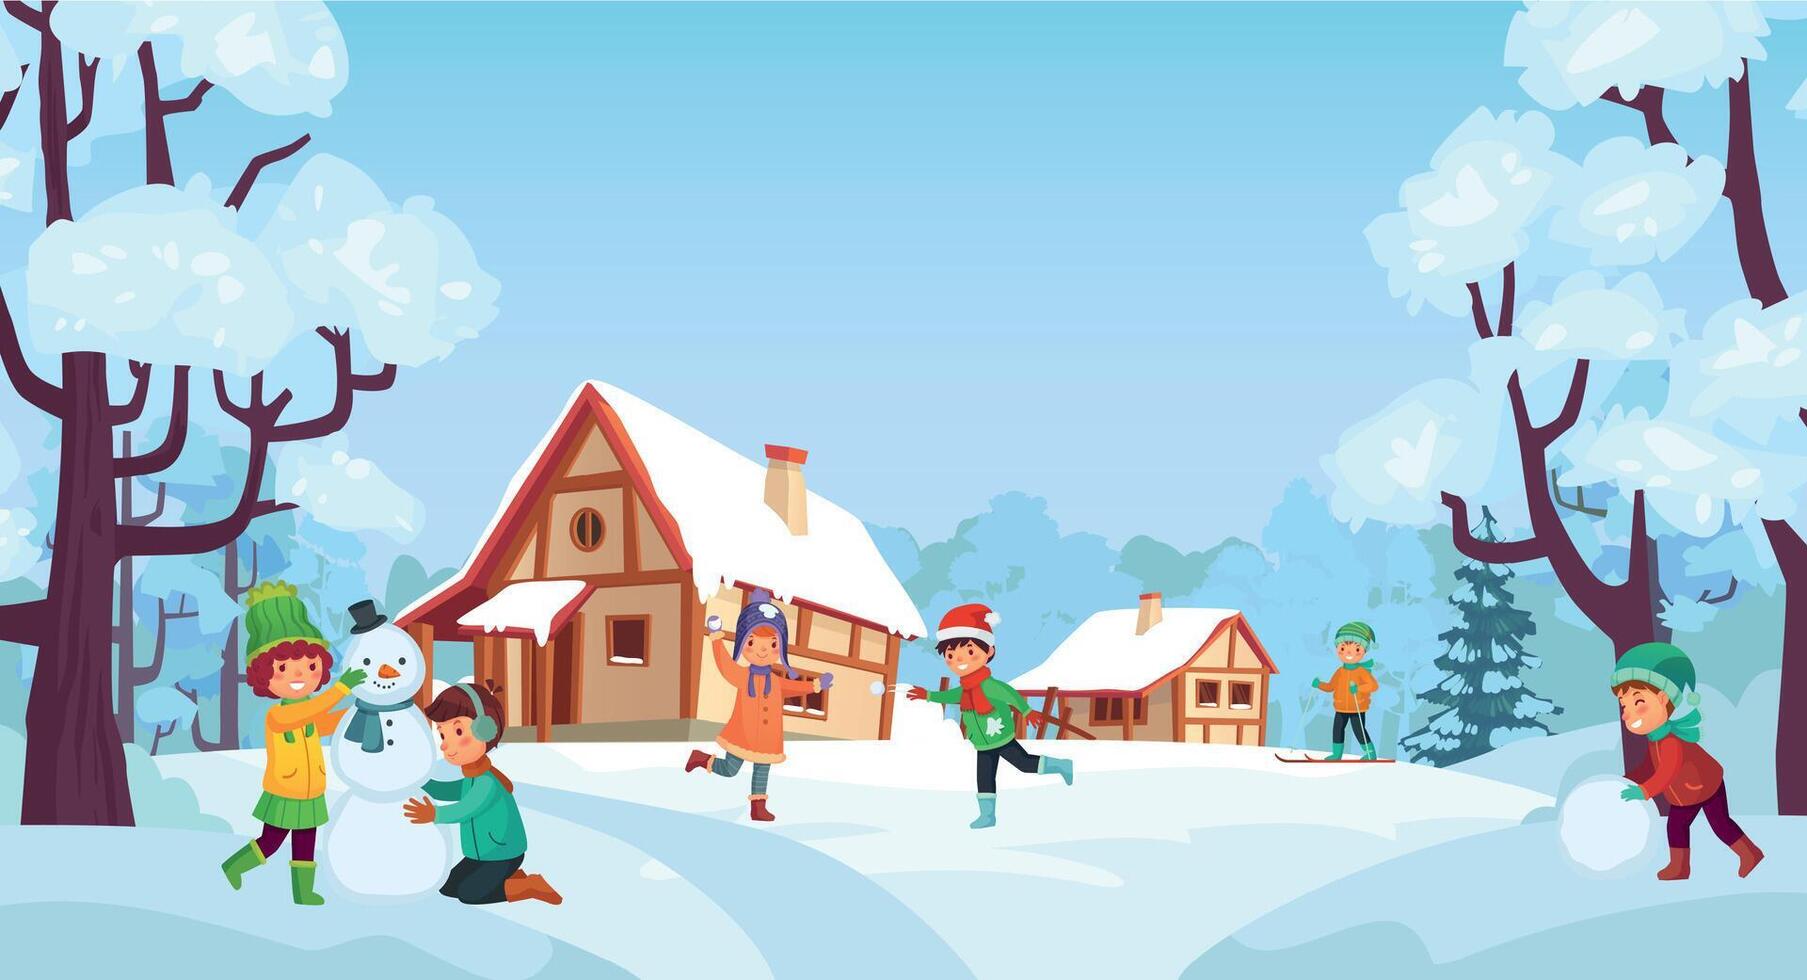 Winter fun for kids. Children playing snowballs, making snowman with scarf and hat. Boy skiing on snowy hills vector